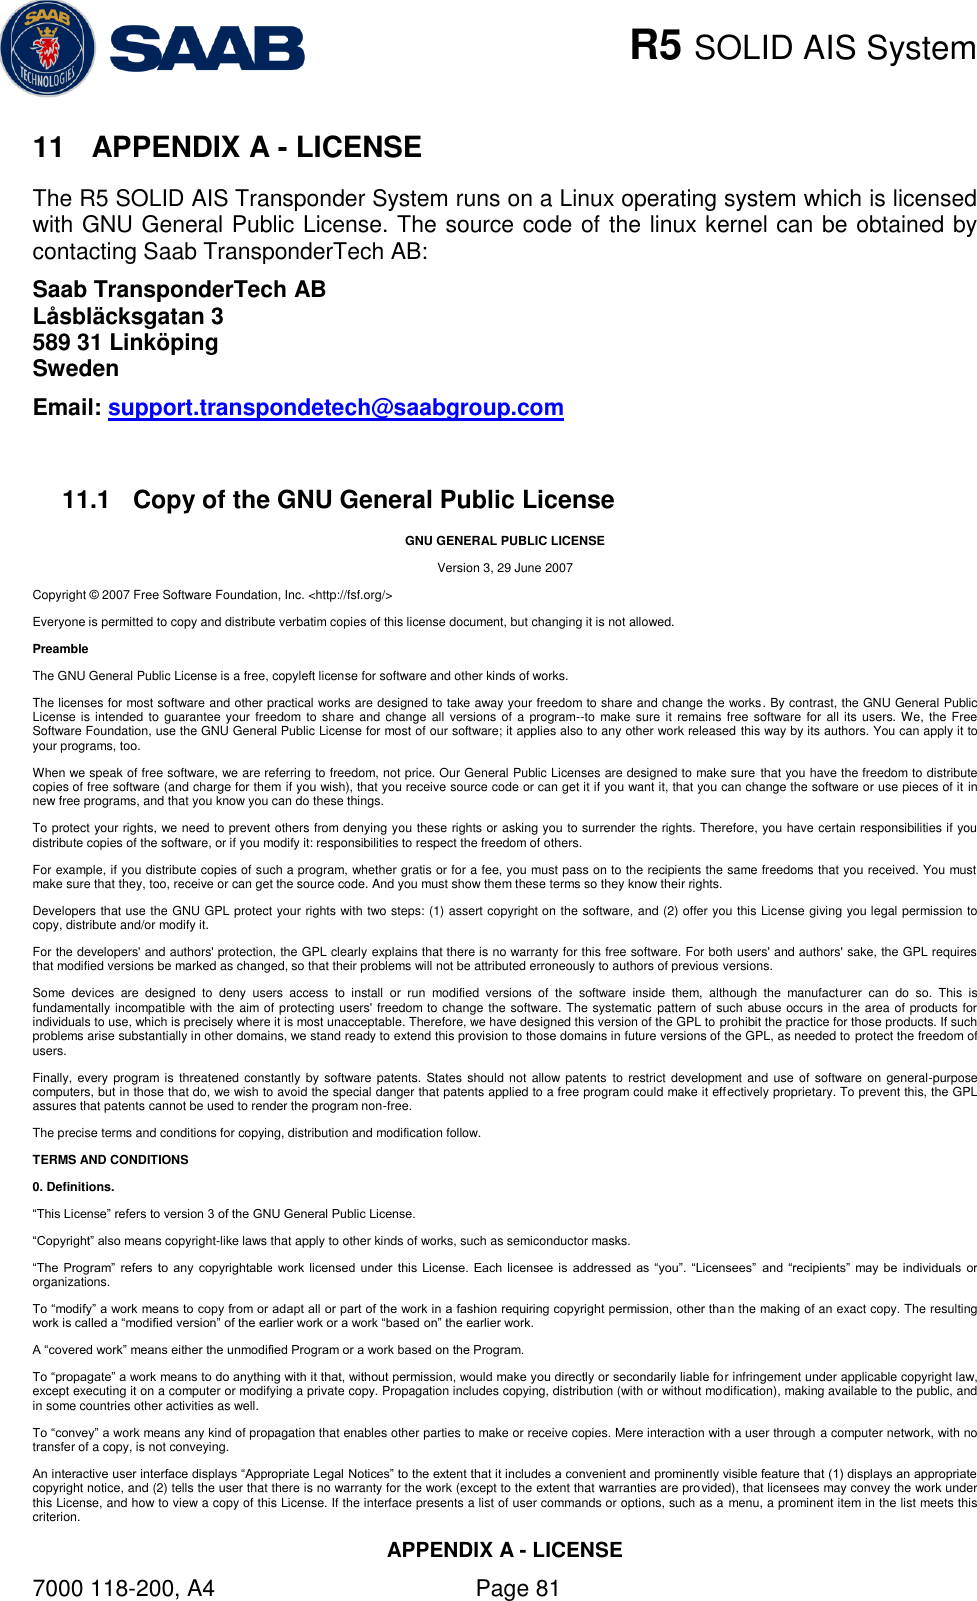    R5 SOLID AIS System APPENDIX A - LICENSE 7000 118-200, A4    Page 81 11  APPENDIX A - LICENSE The R5 SOLID AIS Transponder System runs on a Linux operating system which is licensed with GNU General Public License. The source code of the linux kernel can be obtained by contacting Saab TransponderTech AB: Saab TransponderTech AB Låsbläcksgatan 3 589 31 Linköping Sweden Email: support.transpondetech@saabgroup.com  11.1  Copy of the GNU General Public License GNU GENERAL PUBLIC LICENSE Version 3, 29 June 2007 Copyright © 2007 Free Software Foundation, Inc. &lt;http://fsf.org/&gt; Everyone is permitted to copy and distribute verbatim copies of this license document, but changing it is not allowed.  Preamble The GNU General Public License is a free, copyleft license for software and other kinds of works. The licenses for most software and other practical works are designed to take away your freedom to share and change the works. By contrast, the GNU General Public License is intended  to  guarantee your freedom to share  and  change all  versions  of  a program--to  make sure it  remains  free software  for  all its  users. We,  the Free Software Foundation, use the GNU General Public License for most of our software; it applies also to any other work released this way by its authors. You can apply it to your programs, too. When we speak of free software, we are referring to freedom, not price. Our General Public Licenses are designed to make sure that you have the freedom to distribute copies of free software (and charge for them if you wish), that you receive source code or can get it if you want it, that you can change the software or use pieces of it in new free programs, and that you know you can do these things. To protect your rights, we need to prevent others from denying you these rights or asking you to surrender the rights. Therefore, you have certain responsibilities if you distribute copies of the software, or if you modify it: responsibilities to respect the freedom of others. For example, if you distribute copies of such a program, whether gratis or for a fee, you must pass on to the recipients the same freedoms that you received. You must make sure that they, too, receive or can get the source code. And you must show them these terms so they know their rights. Developers that use the GNU GPL protect your rights with two steps: (1) assert copyright on the software, and (2) offer you this License giving you legal permission to copy, distribute and/or modify it. For the developers&apos; and authors&apos; protection, the GPL clearly explains that there is no warranty for this free software. For both users&apos; and authors&apos; sake, the GPL requires that modified versions be marked as changed, so that their problems will not be attributed erroneously to authors of previous versions. Some  devices  are  designed  to  deny  users  access  to  install  or  run  modified  versions  of  the  software  inside  them,  although  the  manufacturer  can  do  so.  This  is fundamentally incompatible with the aim of protecting users&apos; freedom to change the software. The systematic pattern of such abuse occurs in the area of products for individuals to use, which is precisely where it is most unacceptable. Therefore, we have designed this version of the GPL to prohibit the practice for those products. If such problems arise substantially in other domains, we stand ready to extend this provision to those domains in future versions of the GPL, as needed to protect the freedom of users. Finally, every  program is threatened  constantly  by software patents. States should not allow patents  to restrict development and  use  of software on general-purpose computers, but in those that do, we wish to avoid the special danger that patents applied to a free program could make it effectively proprietary. To prevent this, the GPL assures that patents cannot be used to render the program non-free. The precise terms and conditions for copying, distribution and modification follow. TERMS AND CONDITIONS 0. Definitions. “This License” refers to version 3 of the GNU General Public License. “Copyright” also means copyright-like laws that apply to other kinds of works, such as semiconductor masks. “The  Program”  refers  to  any  copyrightable  work  licensed  under  this  License.  Each licensee is  addressed as  “you”.  “Licensees”  and  “recipients”  may  be  individuals  or organizations. To “modify” a work means to copy from or adapt all or part of the work in a fashion requiring copyright permission, other tha n the making of an exact copy. The resulting work is called a “modified version” of the earlier work or a work “based on” the earlier work. A “covered work” means either the unmodified Program or a work based on the Program. To “propagate” a work means to do anything with it that, without permission, would make you directly or secondarily liable for infringement under applicable copyright law, except executing it on a computer or modifying a private copy. Propagation includes copying, distribution (with or without modification), making available to the public, and in some countries other activities as well. To “convey” a work means any kind of propagation that enables other parties to make or receive copies. Mere interaction with a user through a computer network, with no transfer of a copy, is not conveying. An interactive user interface displays “Appropriate Legal Notices” to the extent that it includes a convenient and prominently visible feature that (1) displays an appropriate copyright notice, and (2) tells the user that there is no warranty for the work (except to the extent that warranties are provided), that licensees may convey the work under this License, and how to view a copy of this License. If the interface presents a list of user commands or options, such as a menu, a prominent item in the list meets this criterion. 